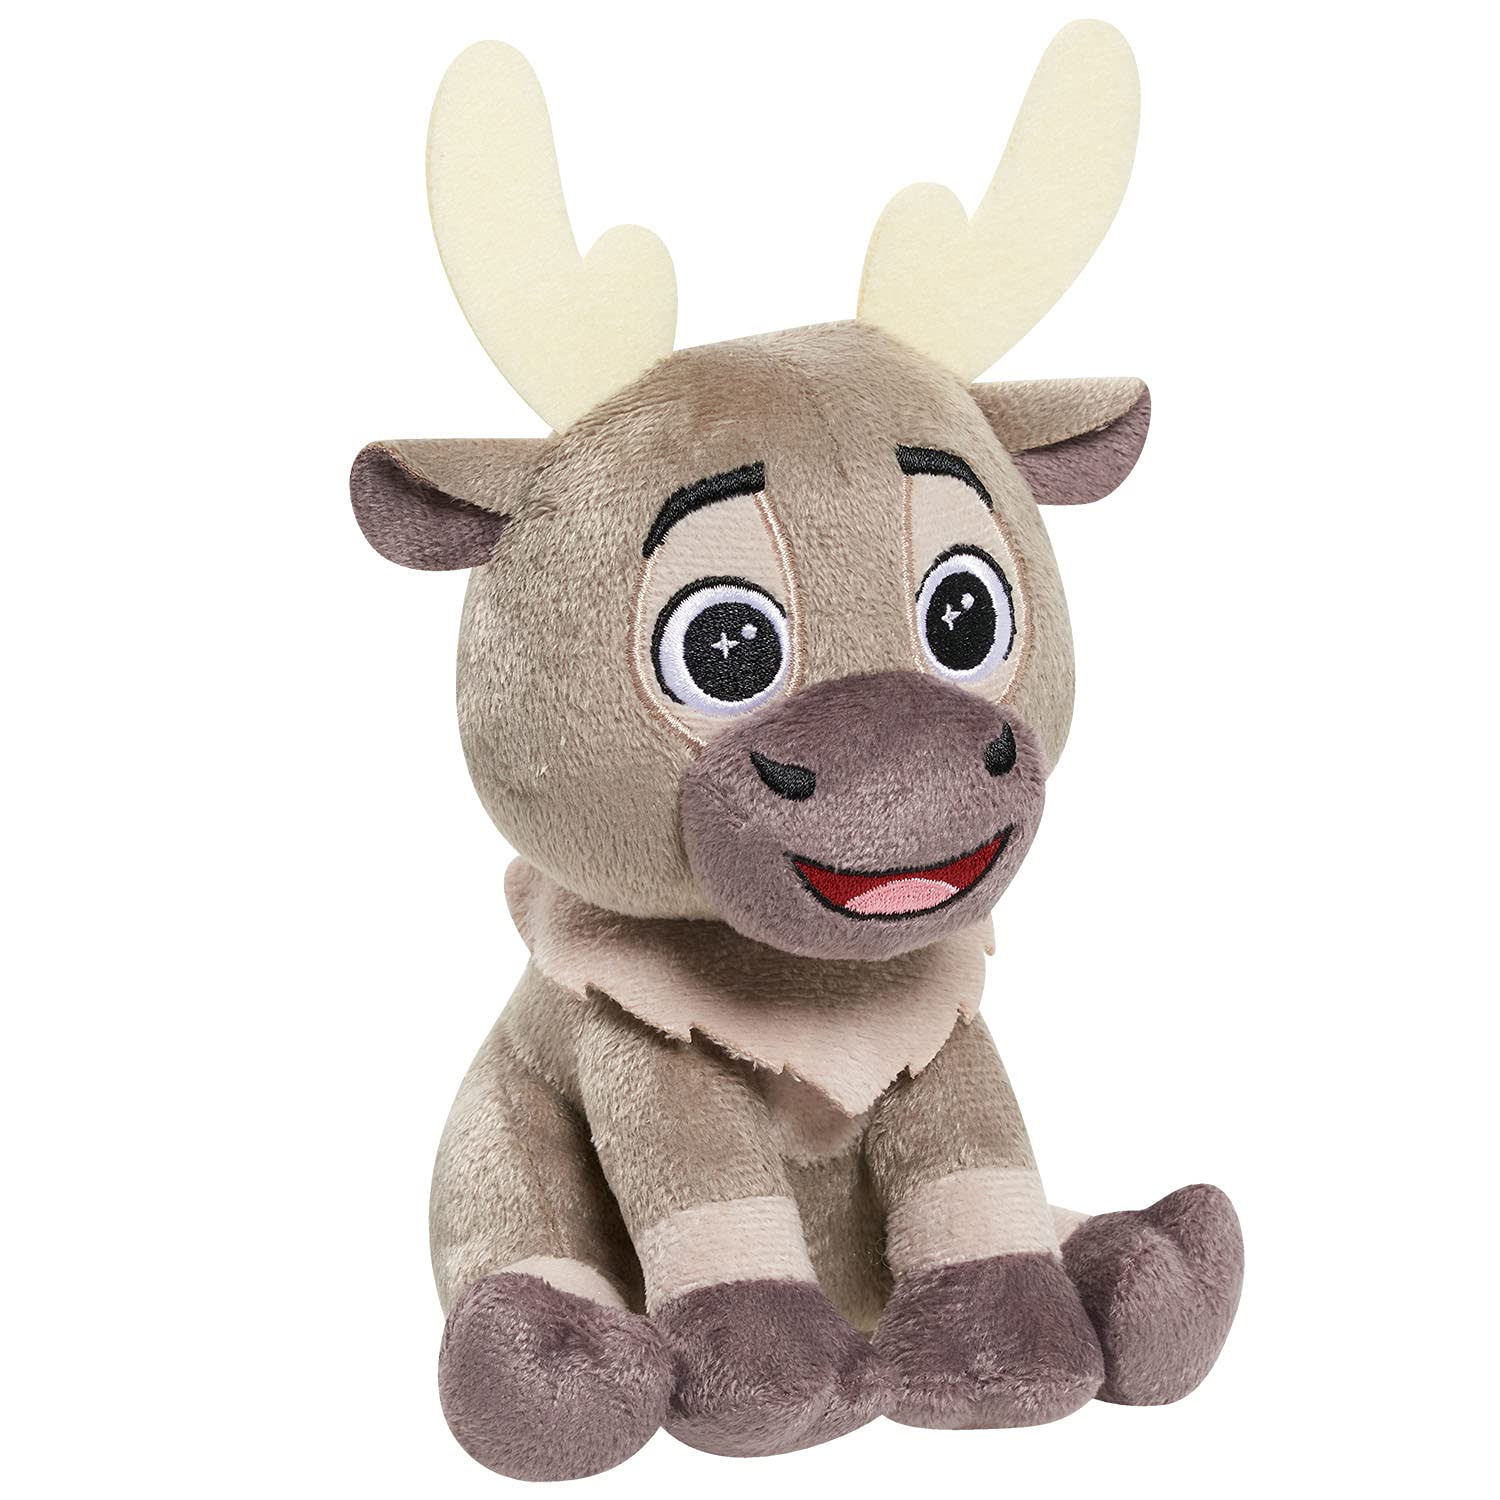 Disney Frozen Talking 6 Inch Small Plushie Toy, Sven, Stuffed Animal, Reindeer, Officially Licensed Kids Toys for Ages 3 Up by Just Play